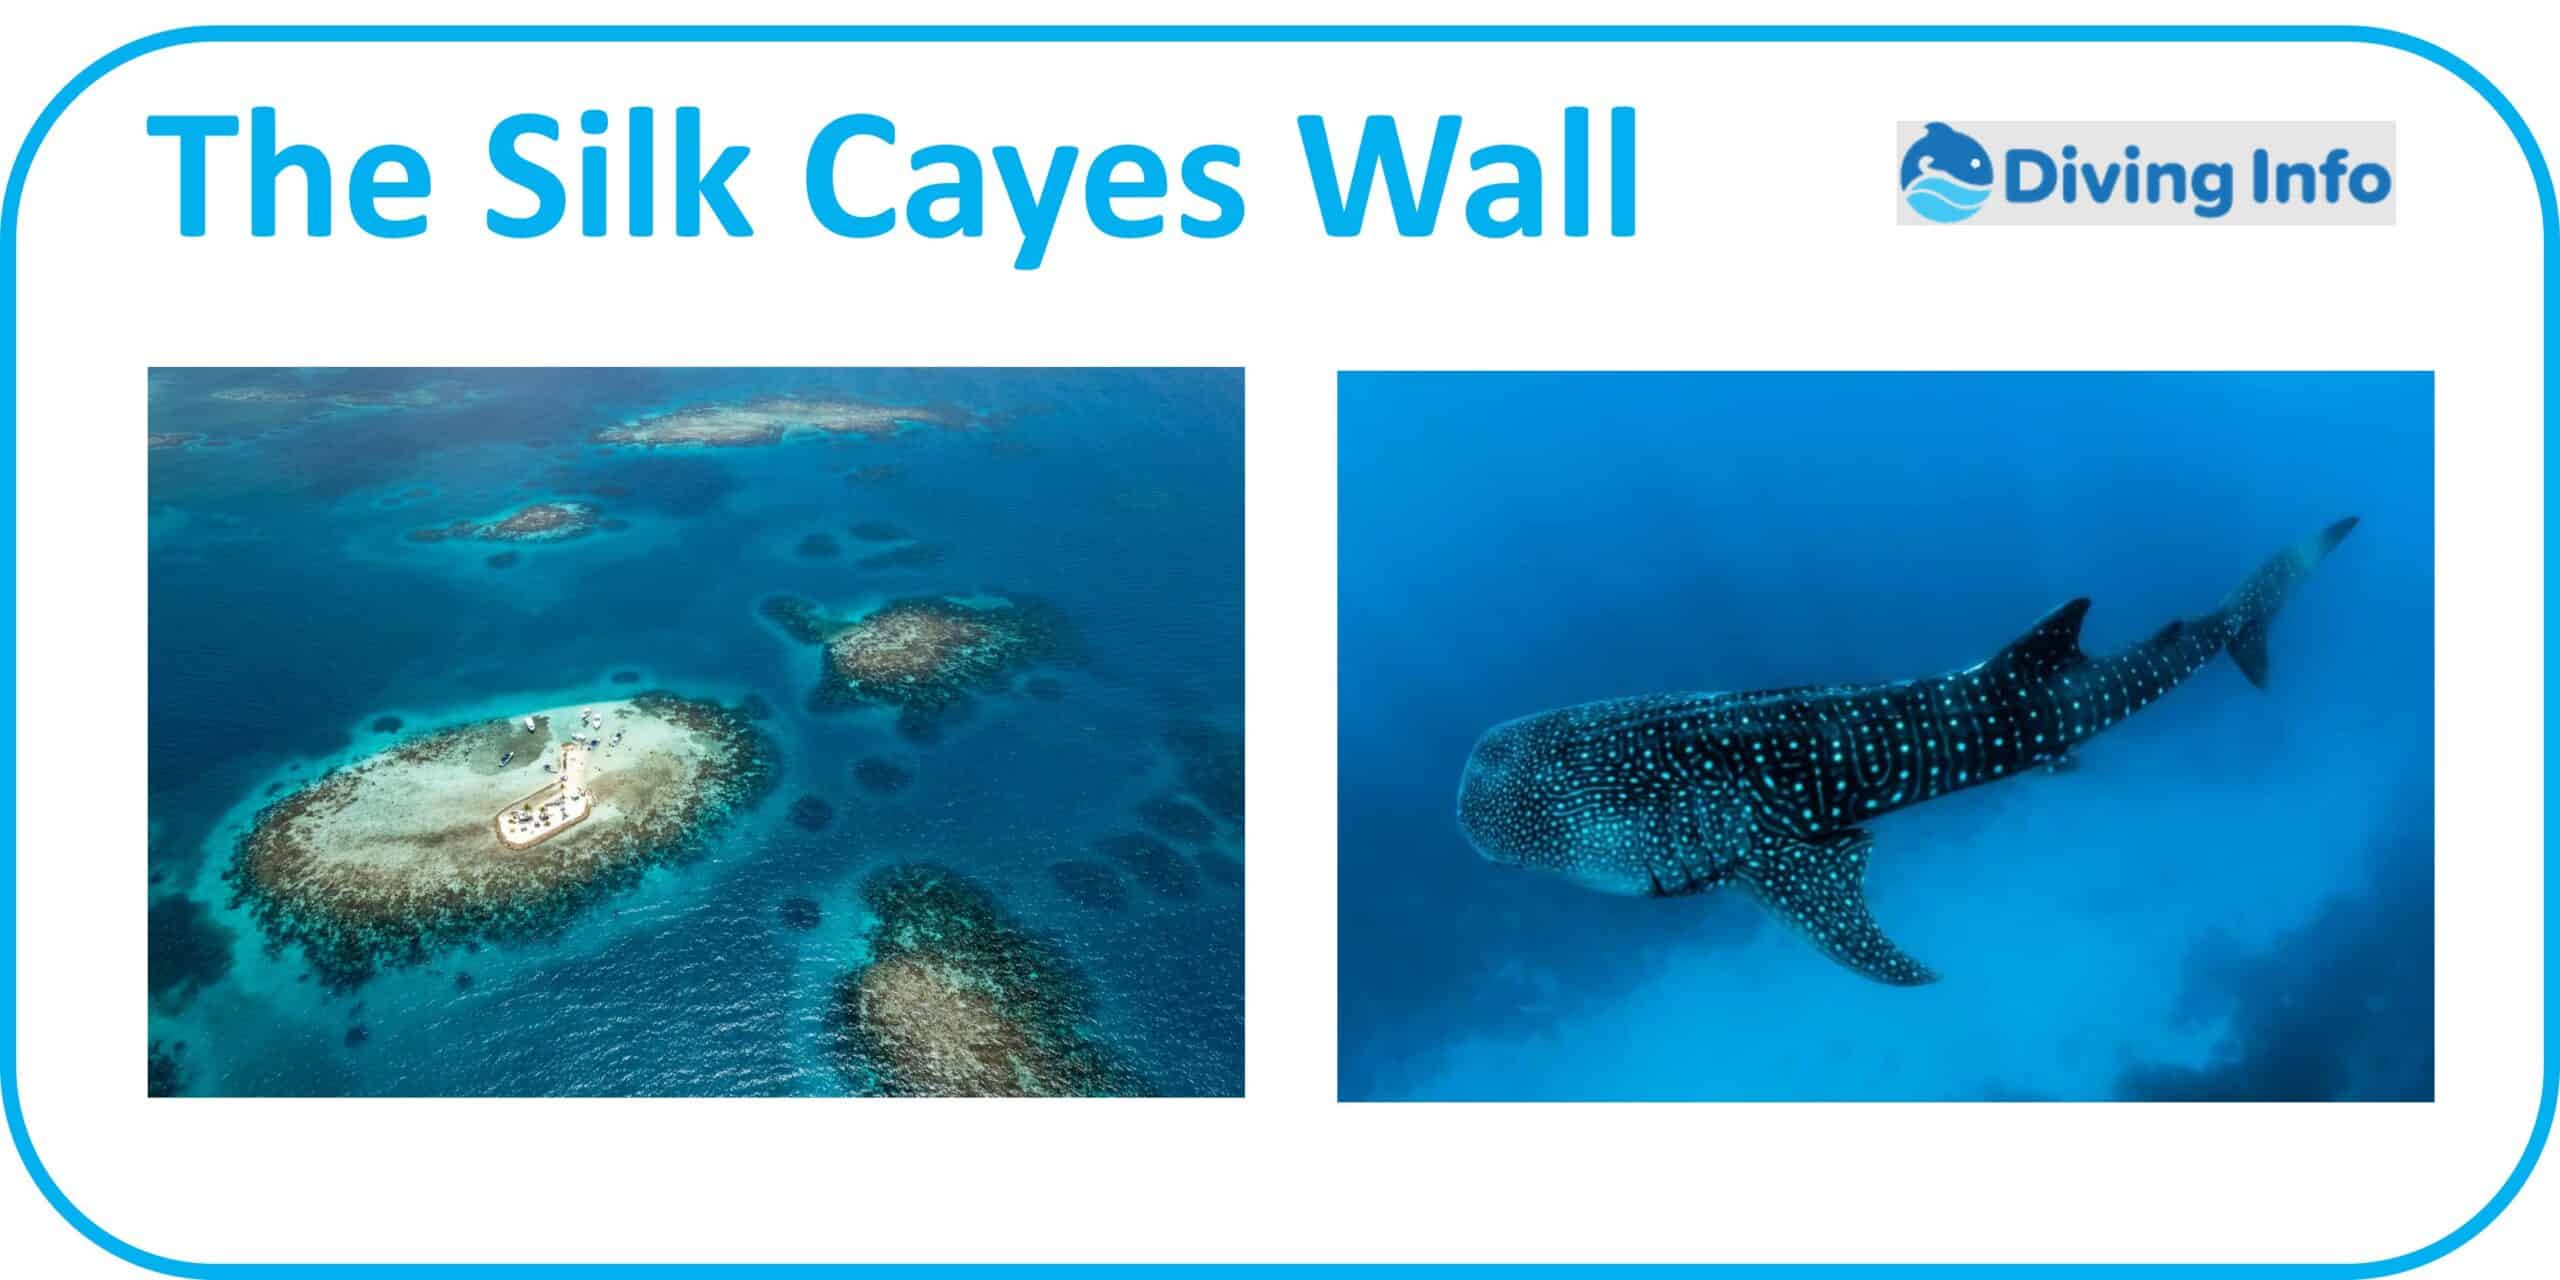 The Silk Cayes Wall